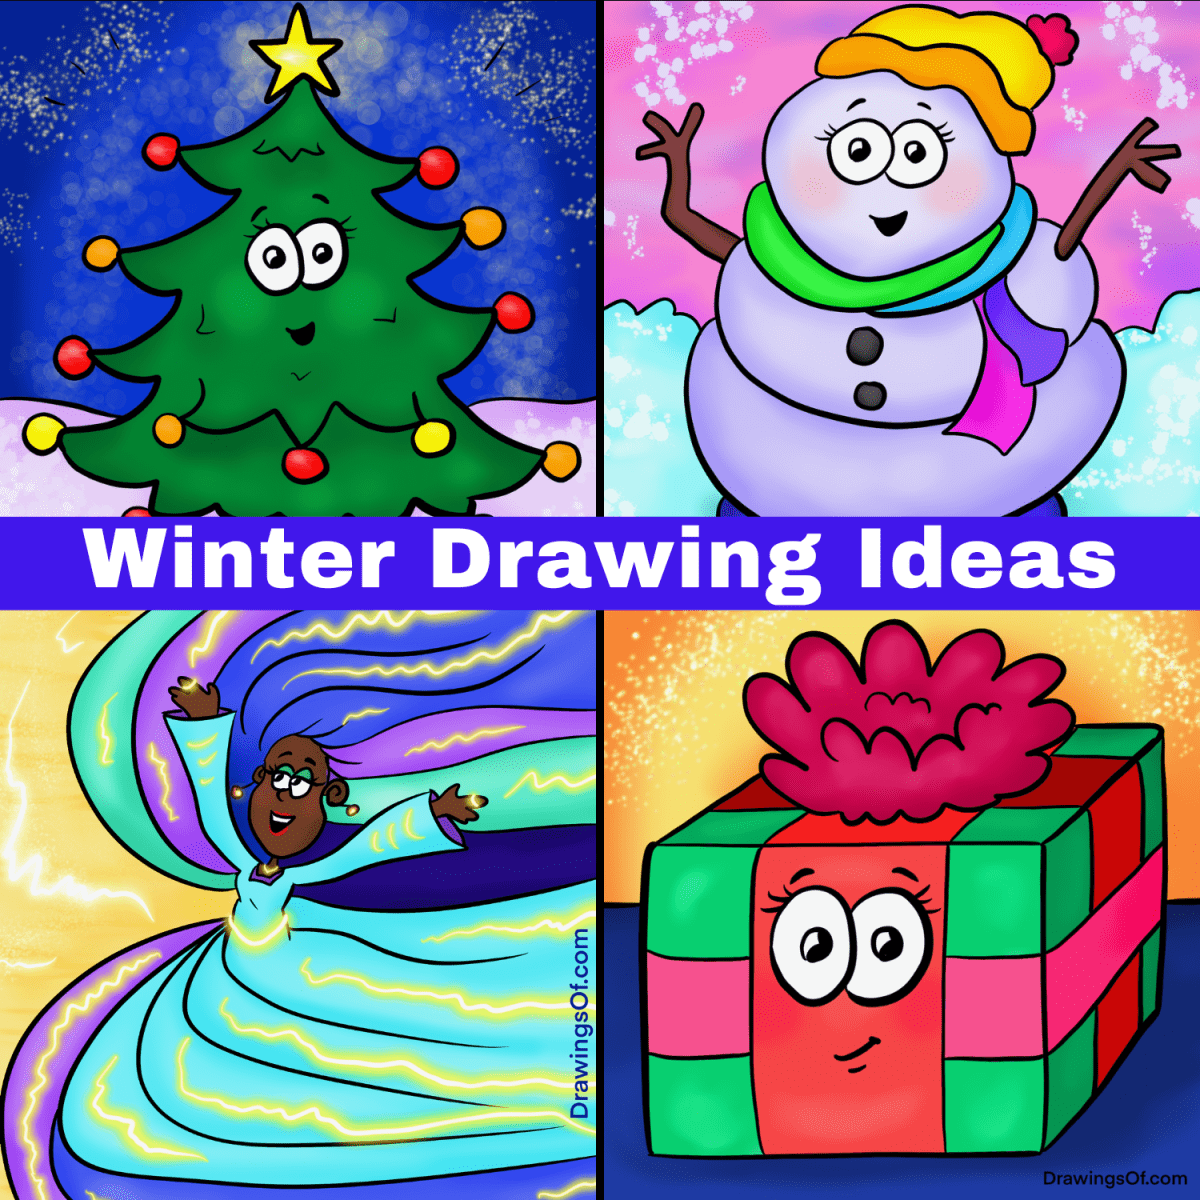 Winter Drawing Ideas: Easy, Cute Instructions - Drawings Of...-saigonsouth.com.vn